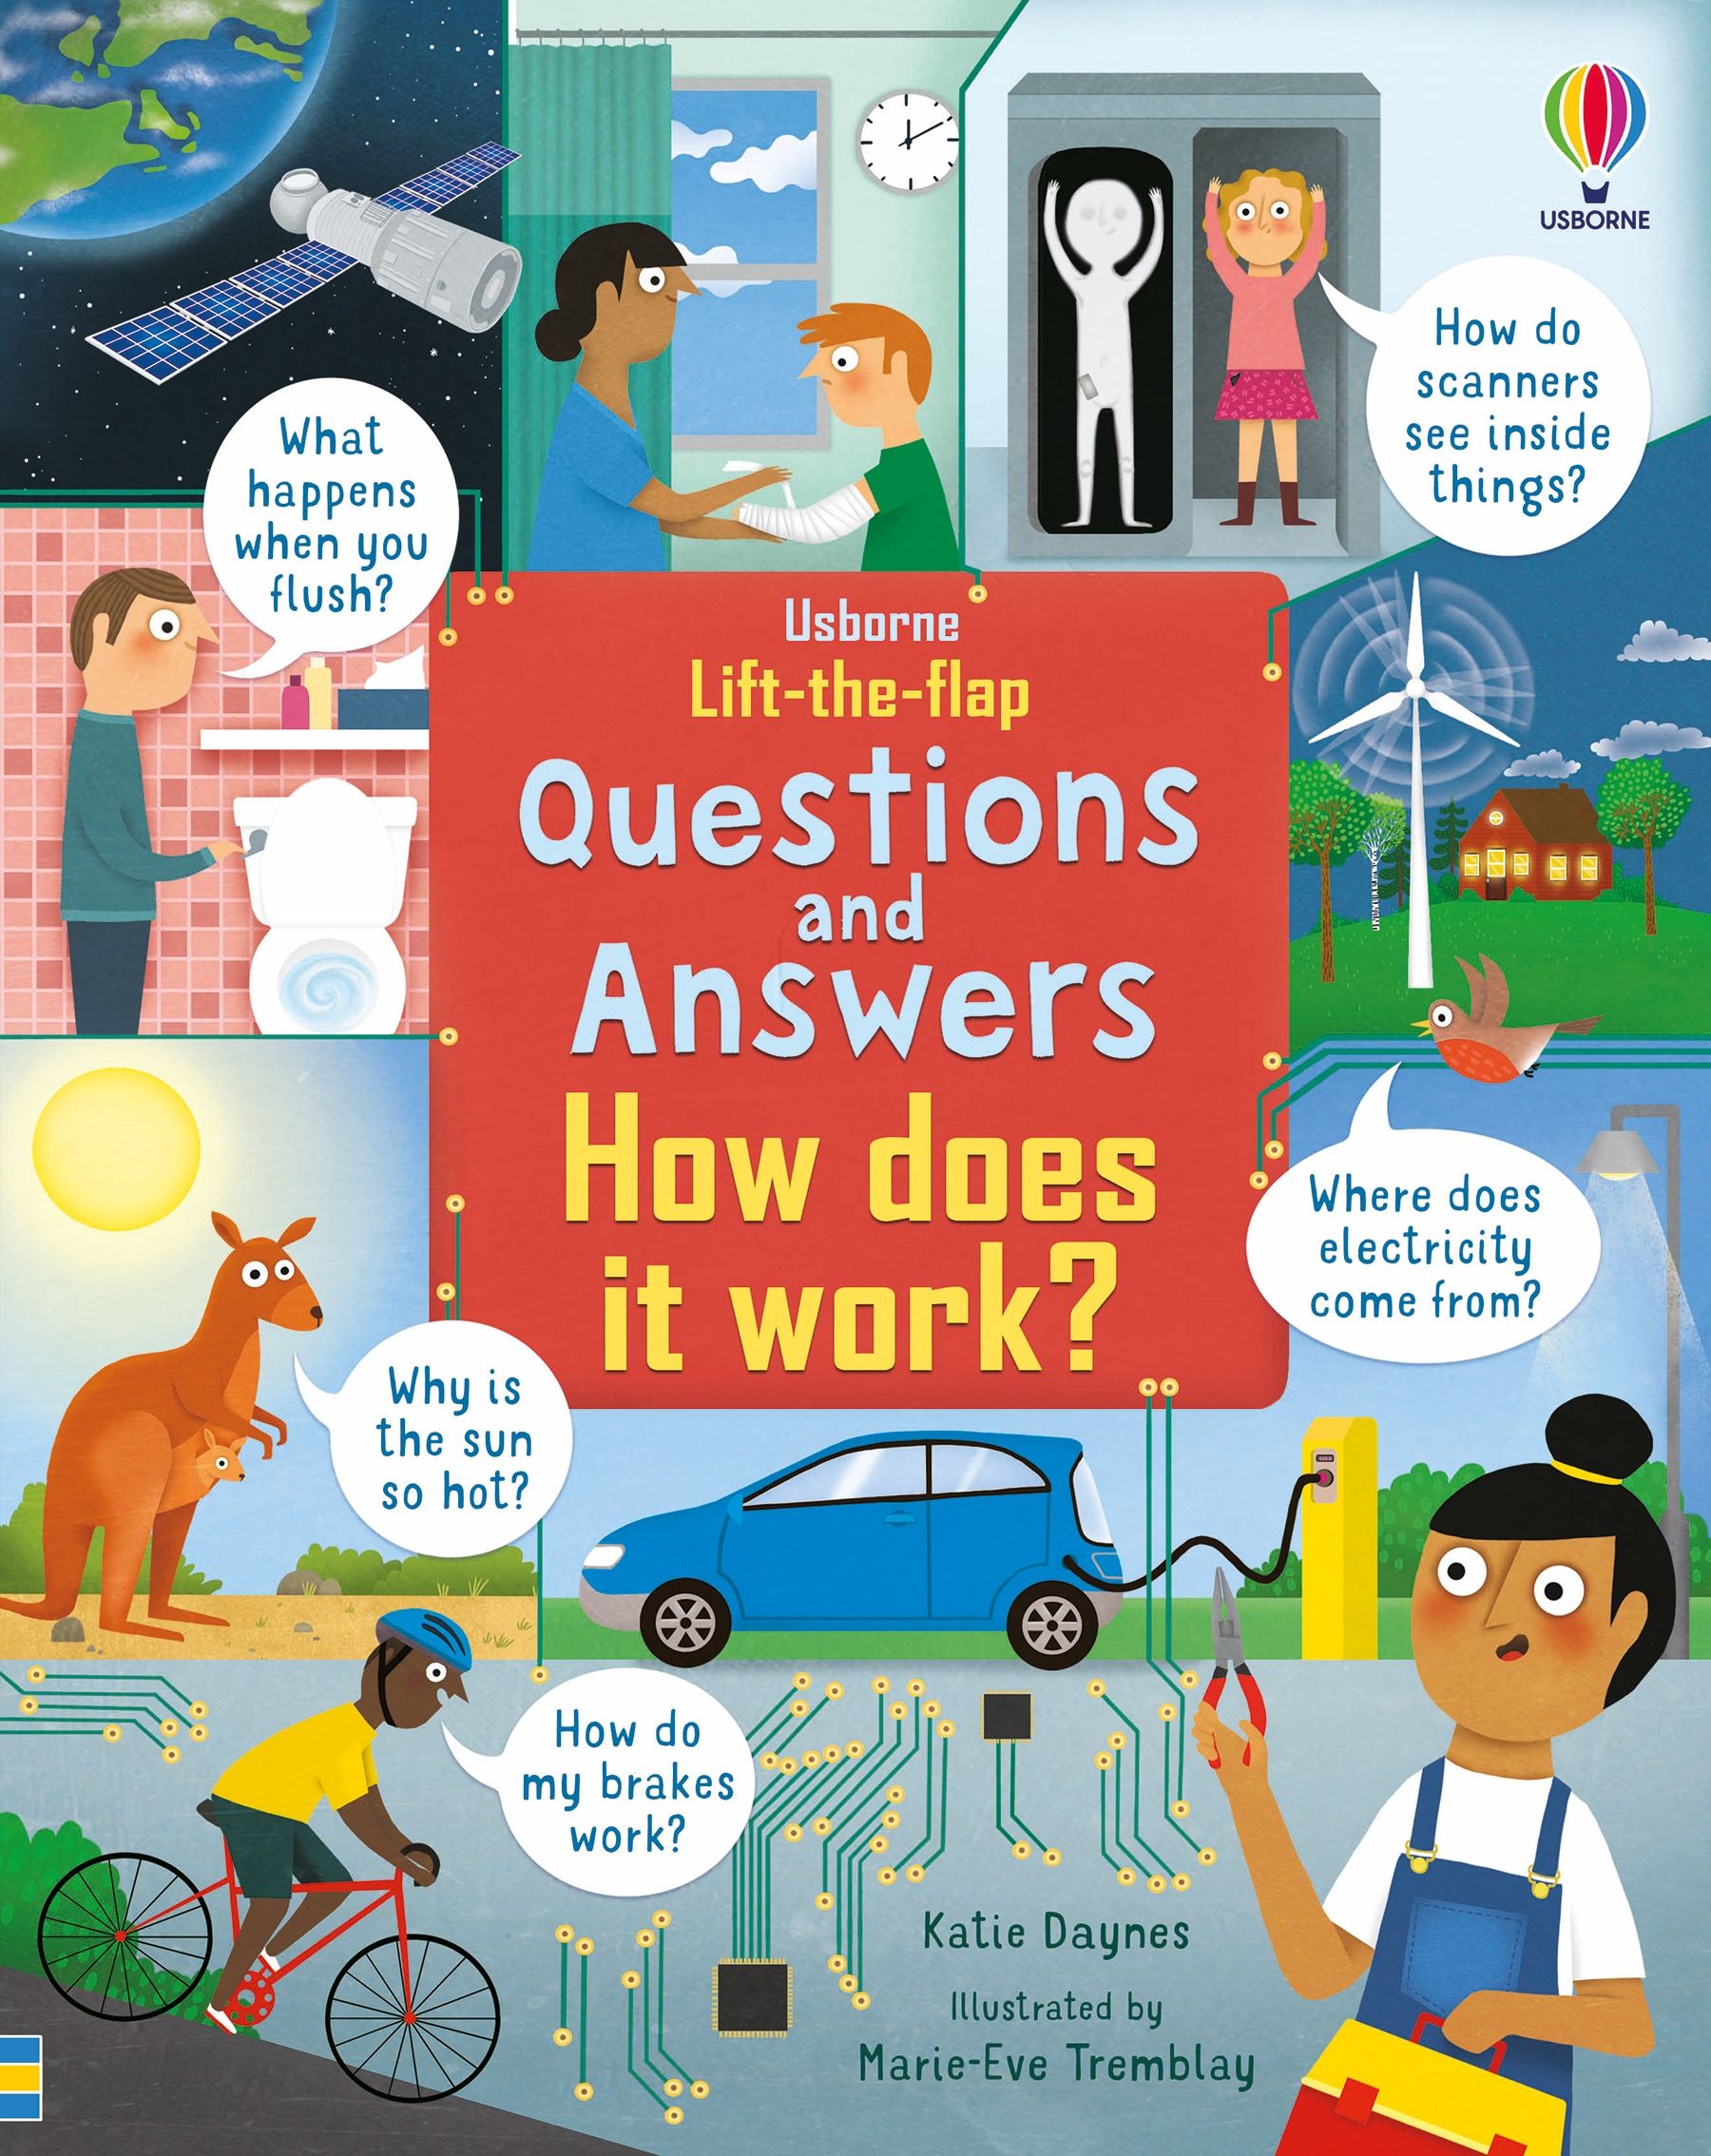 Question and Answers  (4 Books) (8411677196505) (8438316564697)